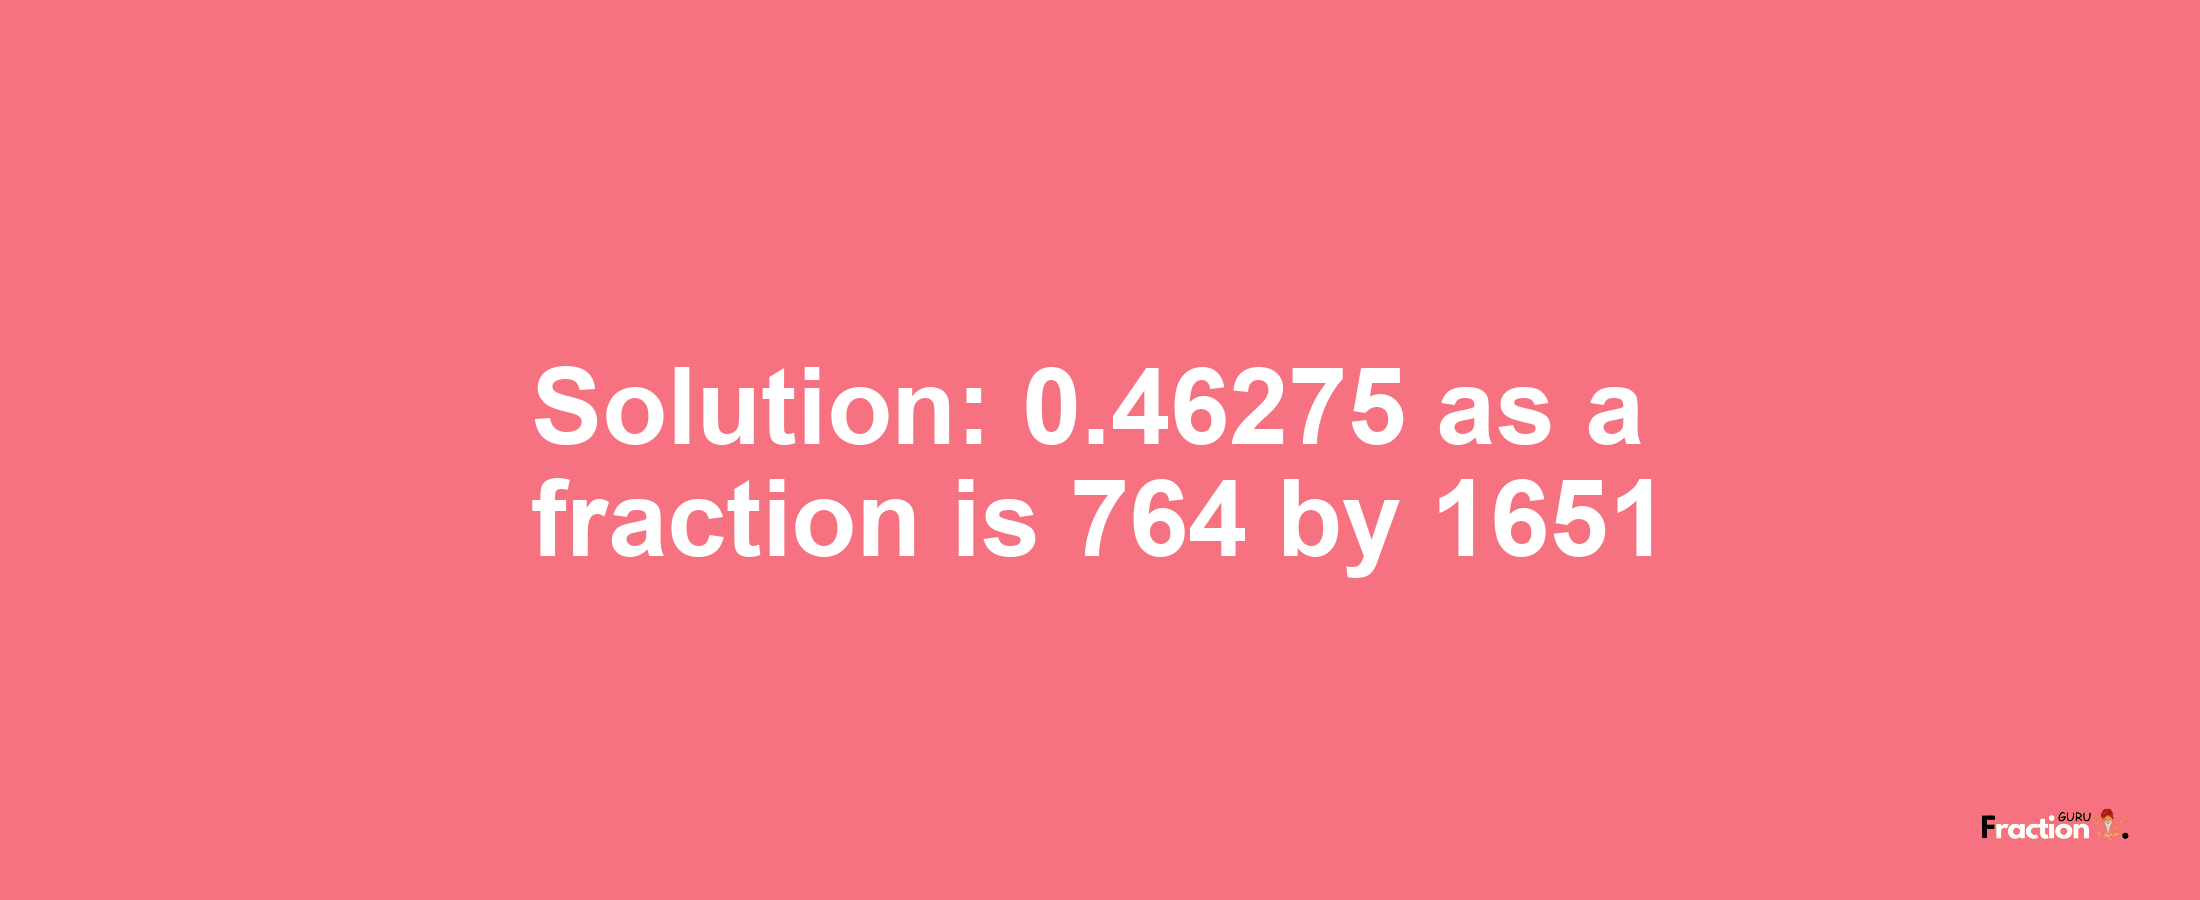 Solution:0.46275 as a fraction is 764/1651